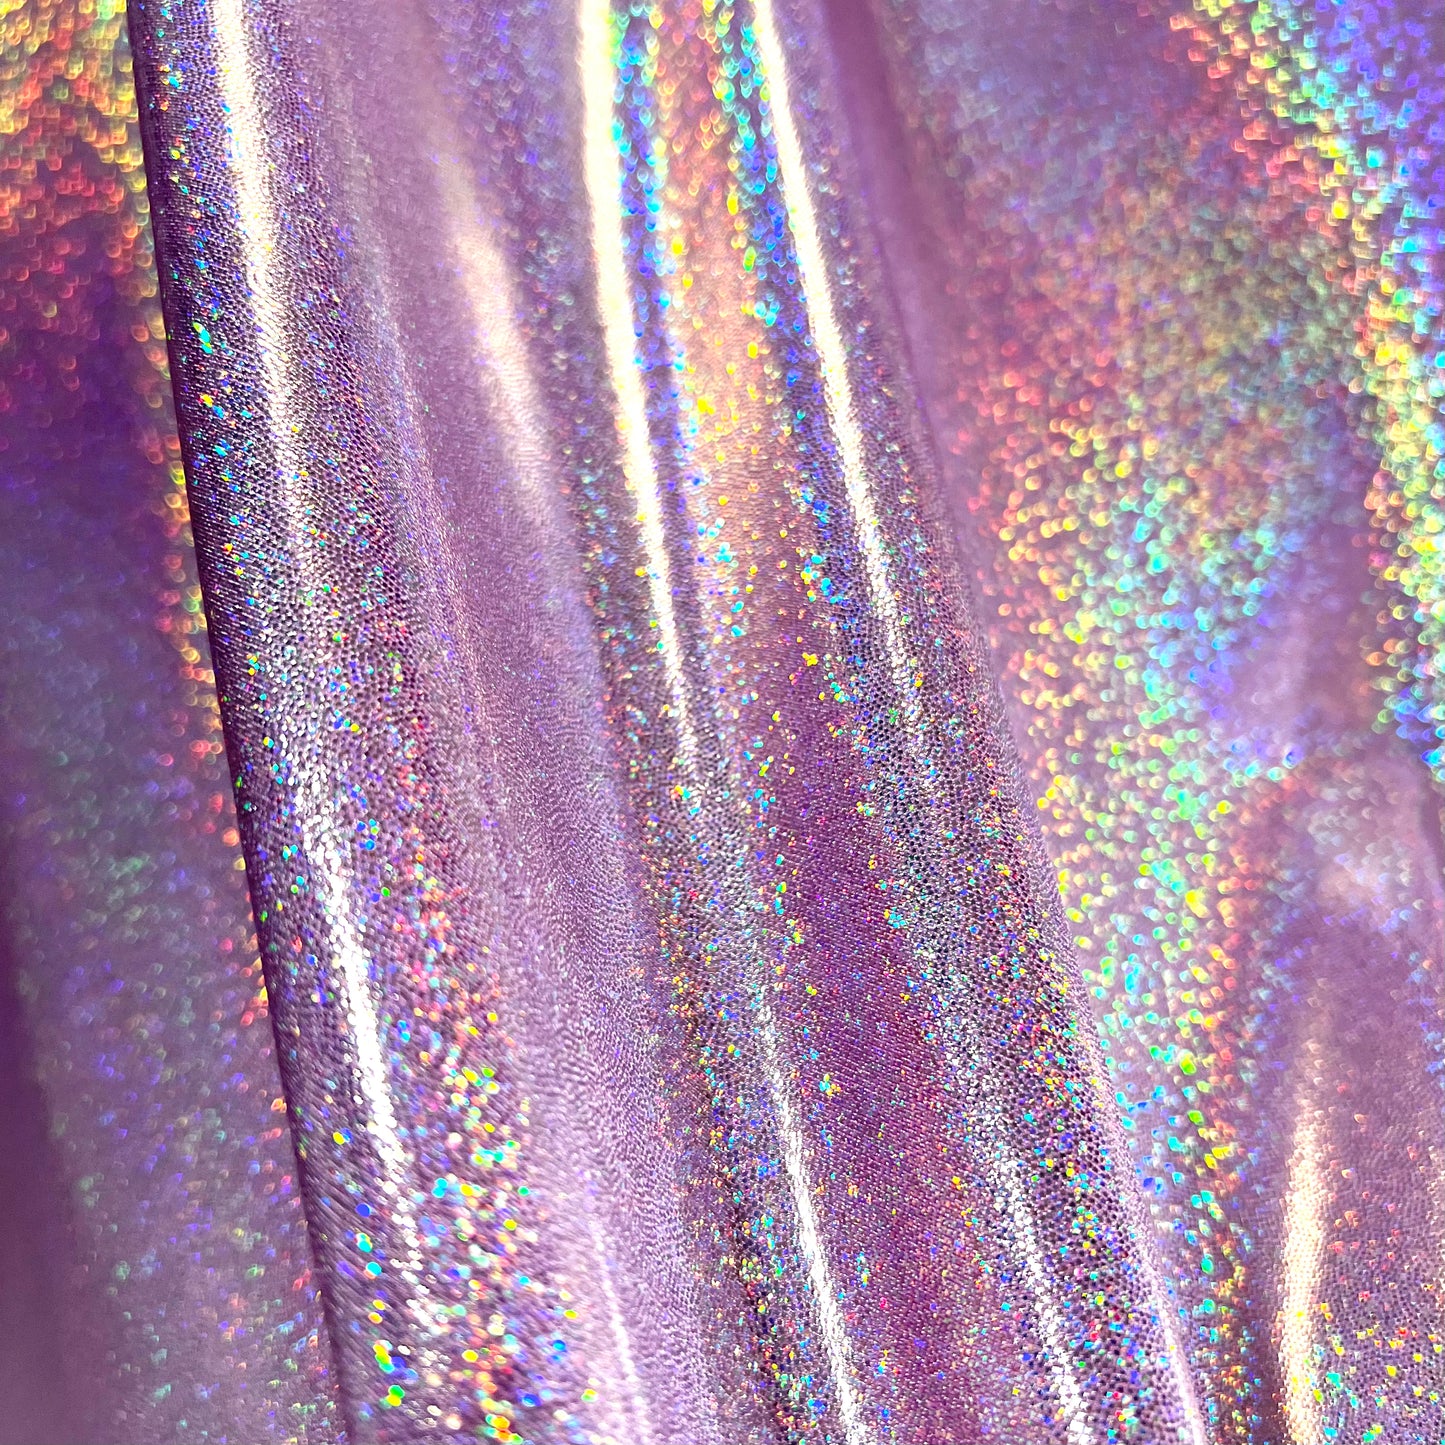 Lilac Holographic